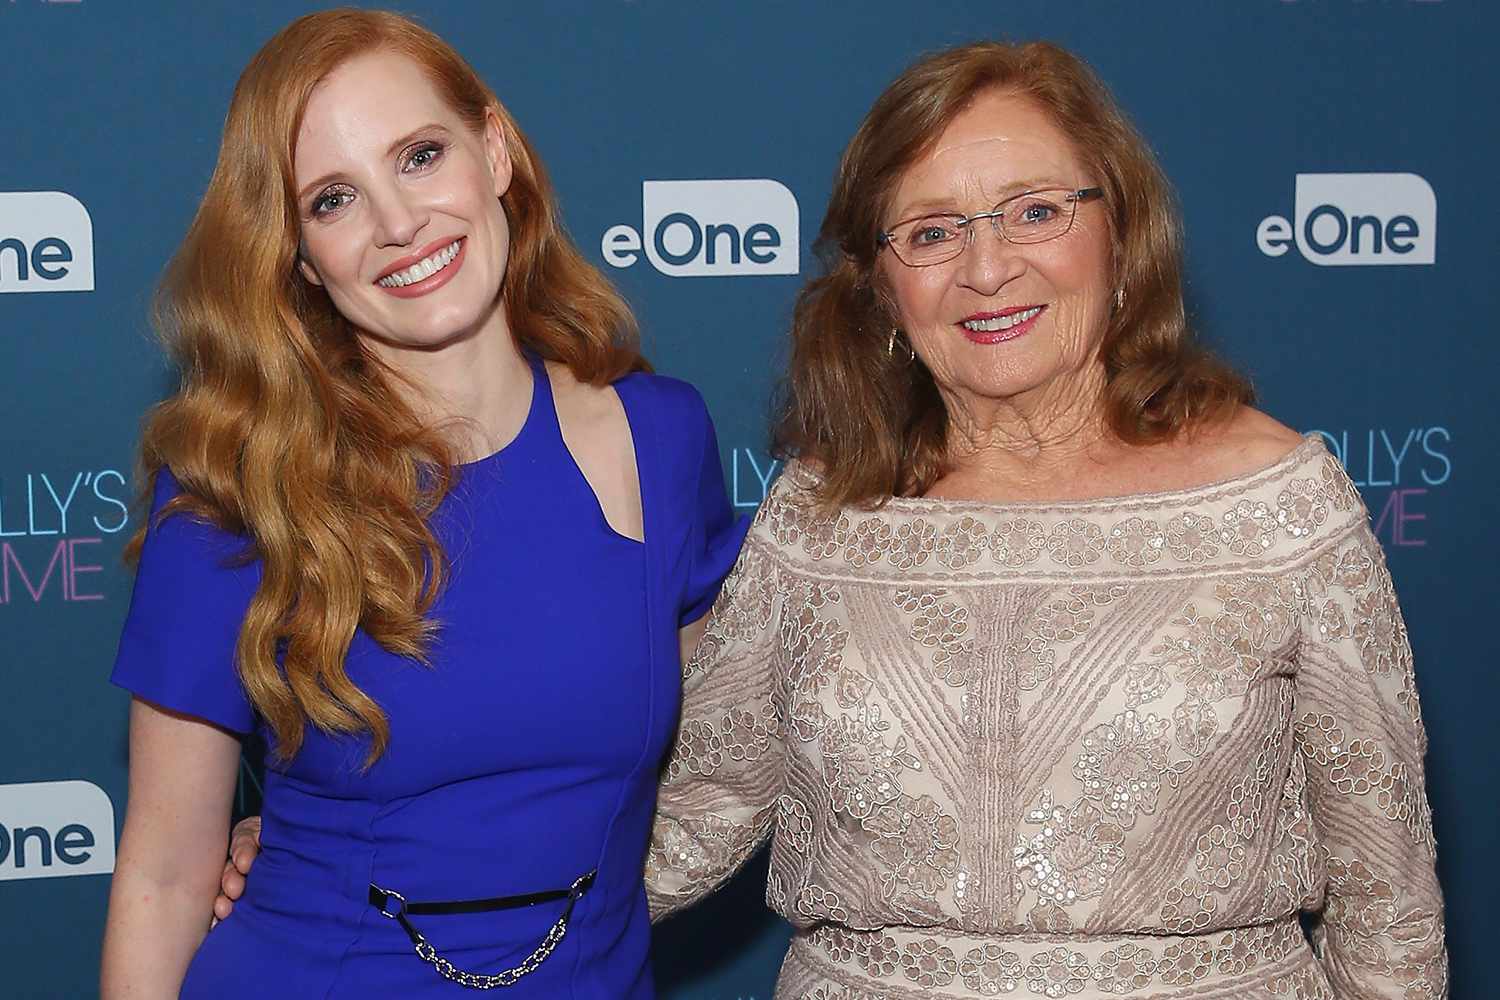 Jessica Chastain Says Grandmother Once Sat on Bradley Cooper's Lap at Party: [object Window]